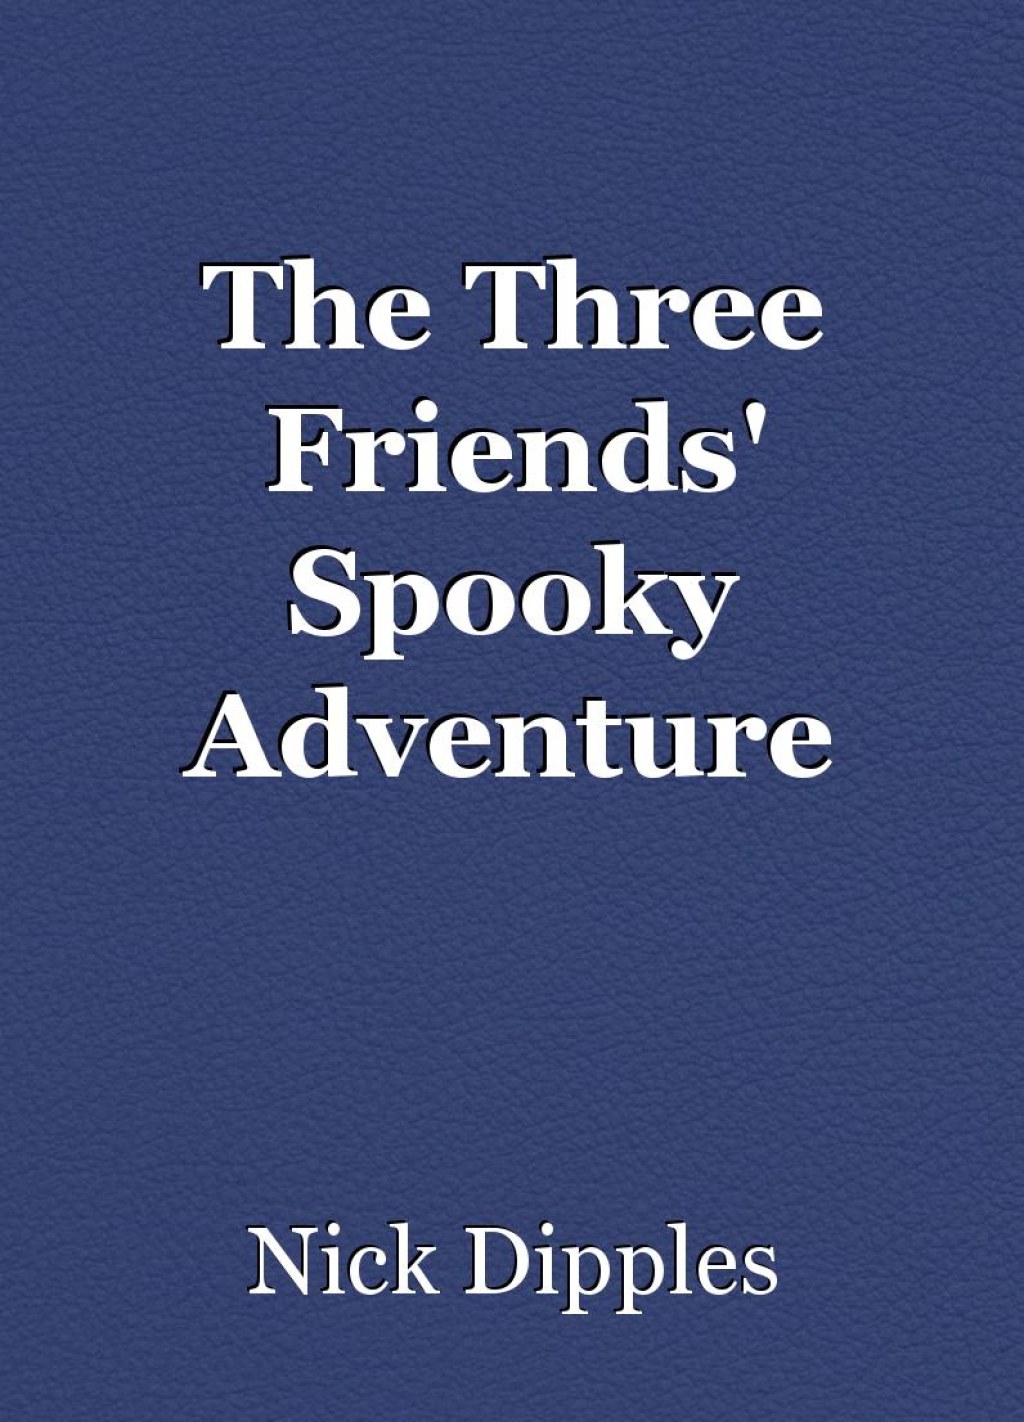 the three friends spooky adventure short story by nick dipples 1